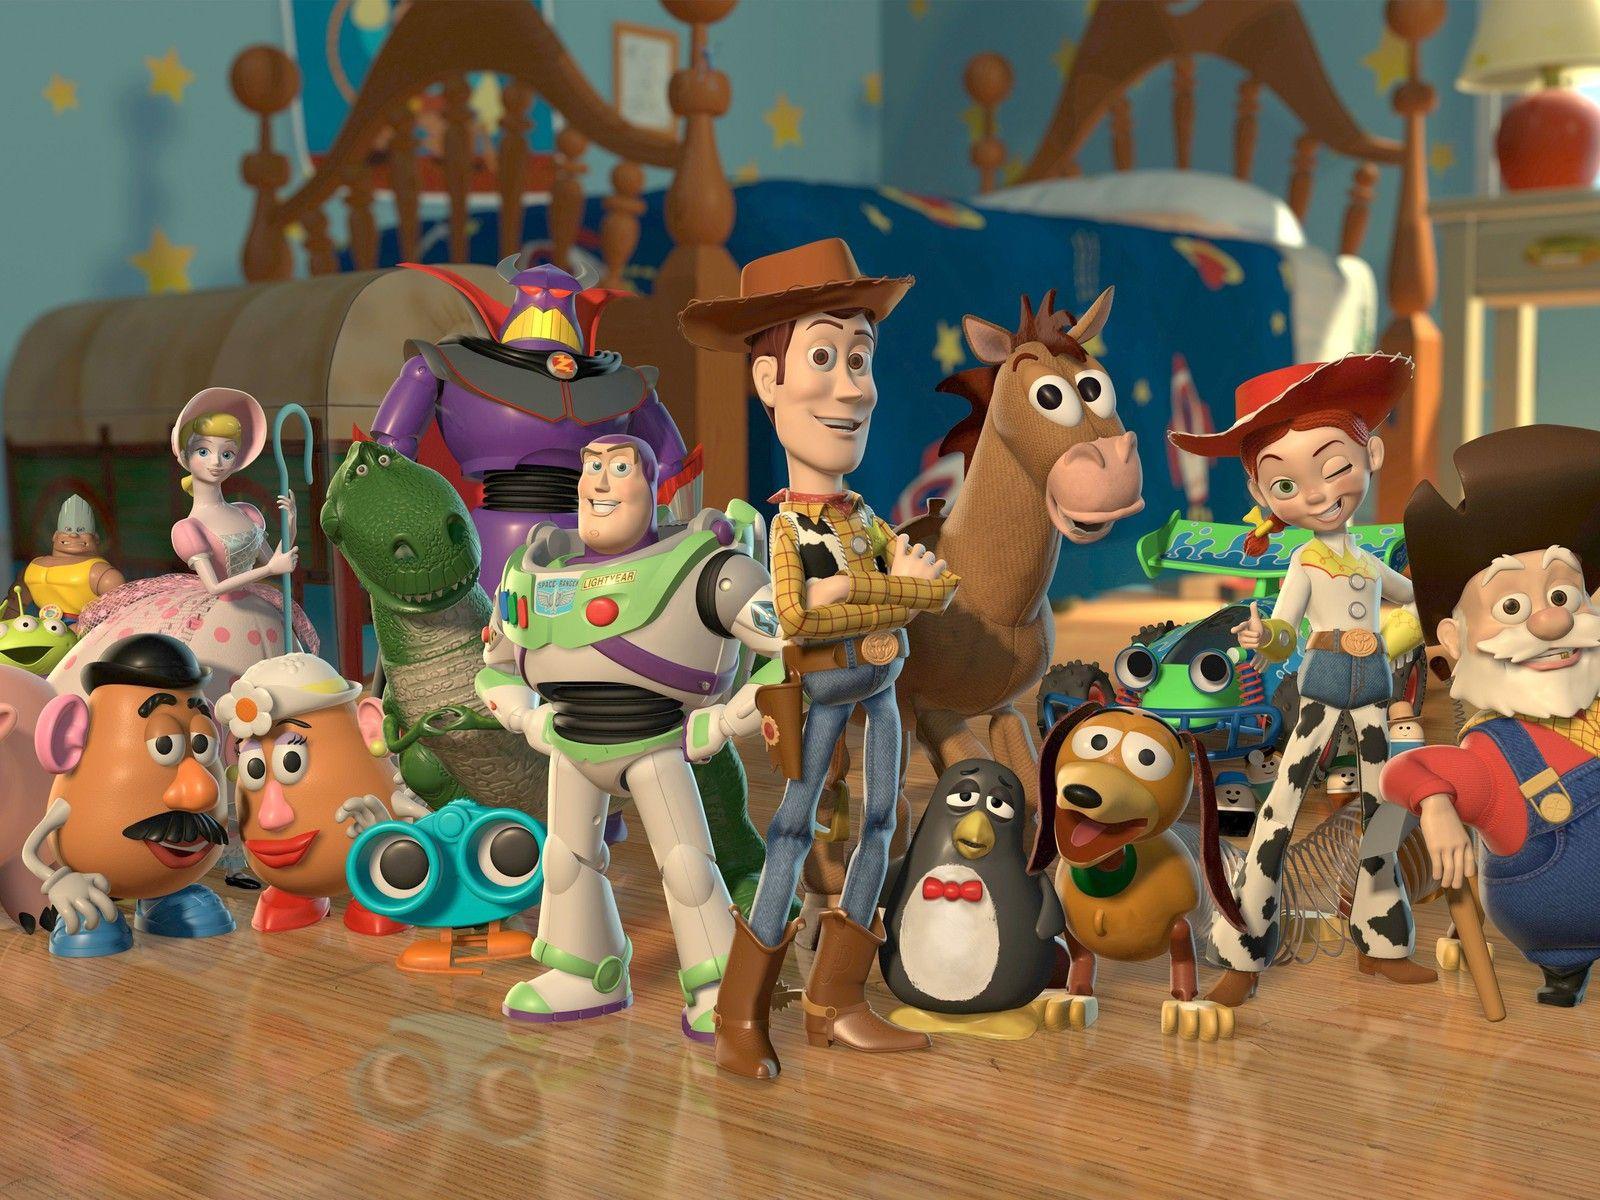 Toy story wallpaper. PC